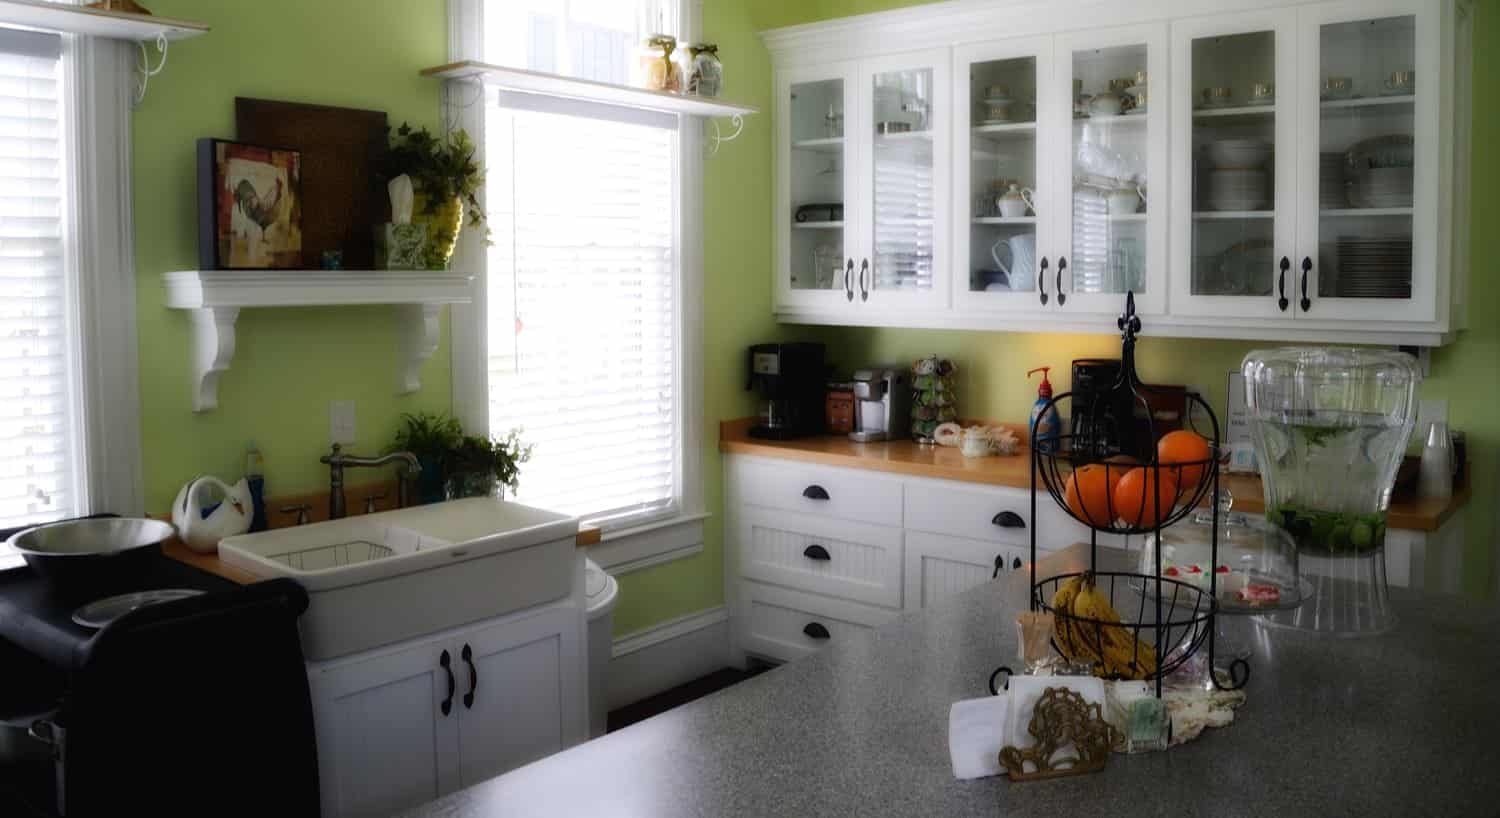 Kitchen with light green walls, white cabinets and shelves, wood tops, two windows and center island